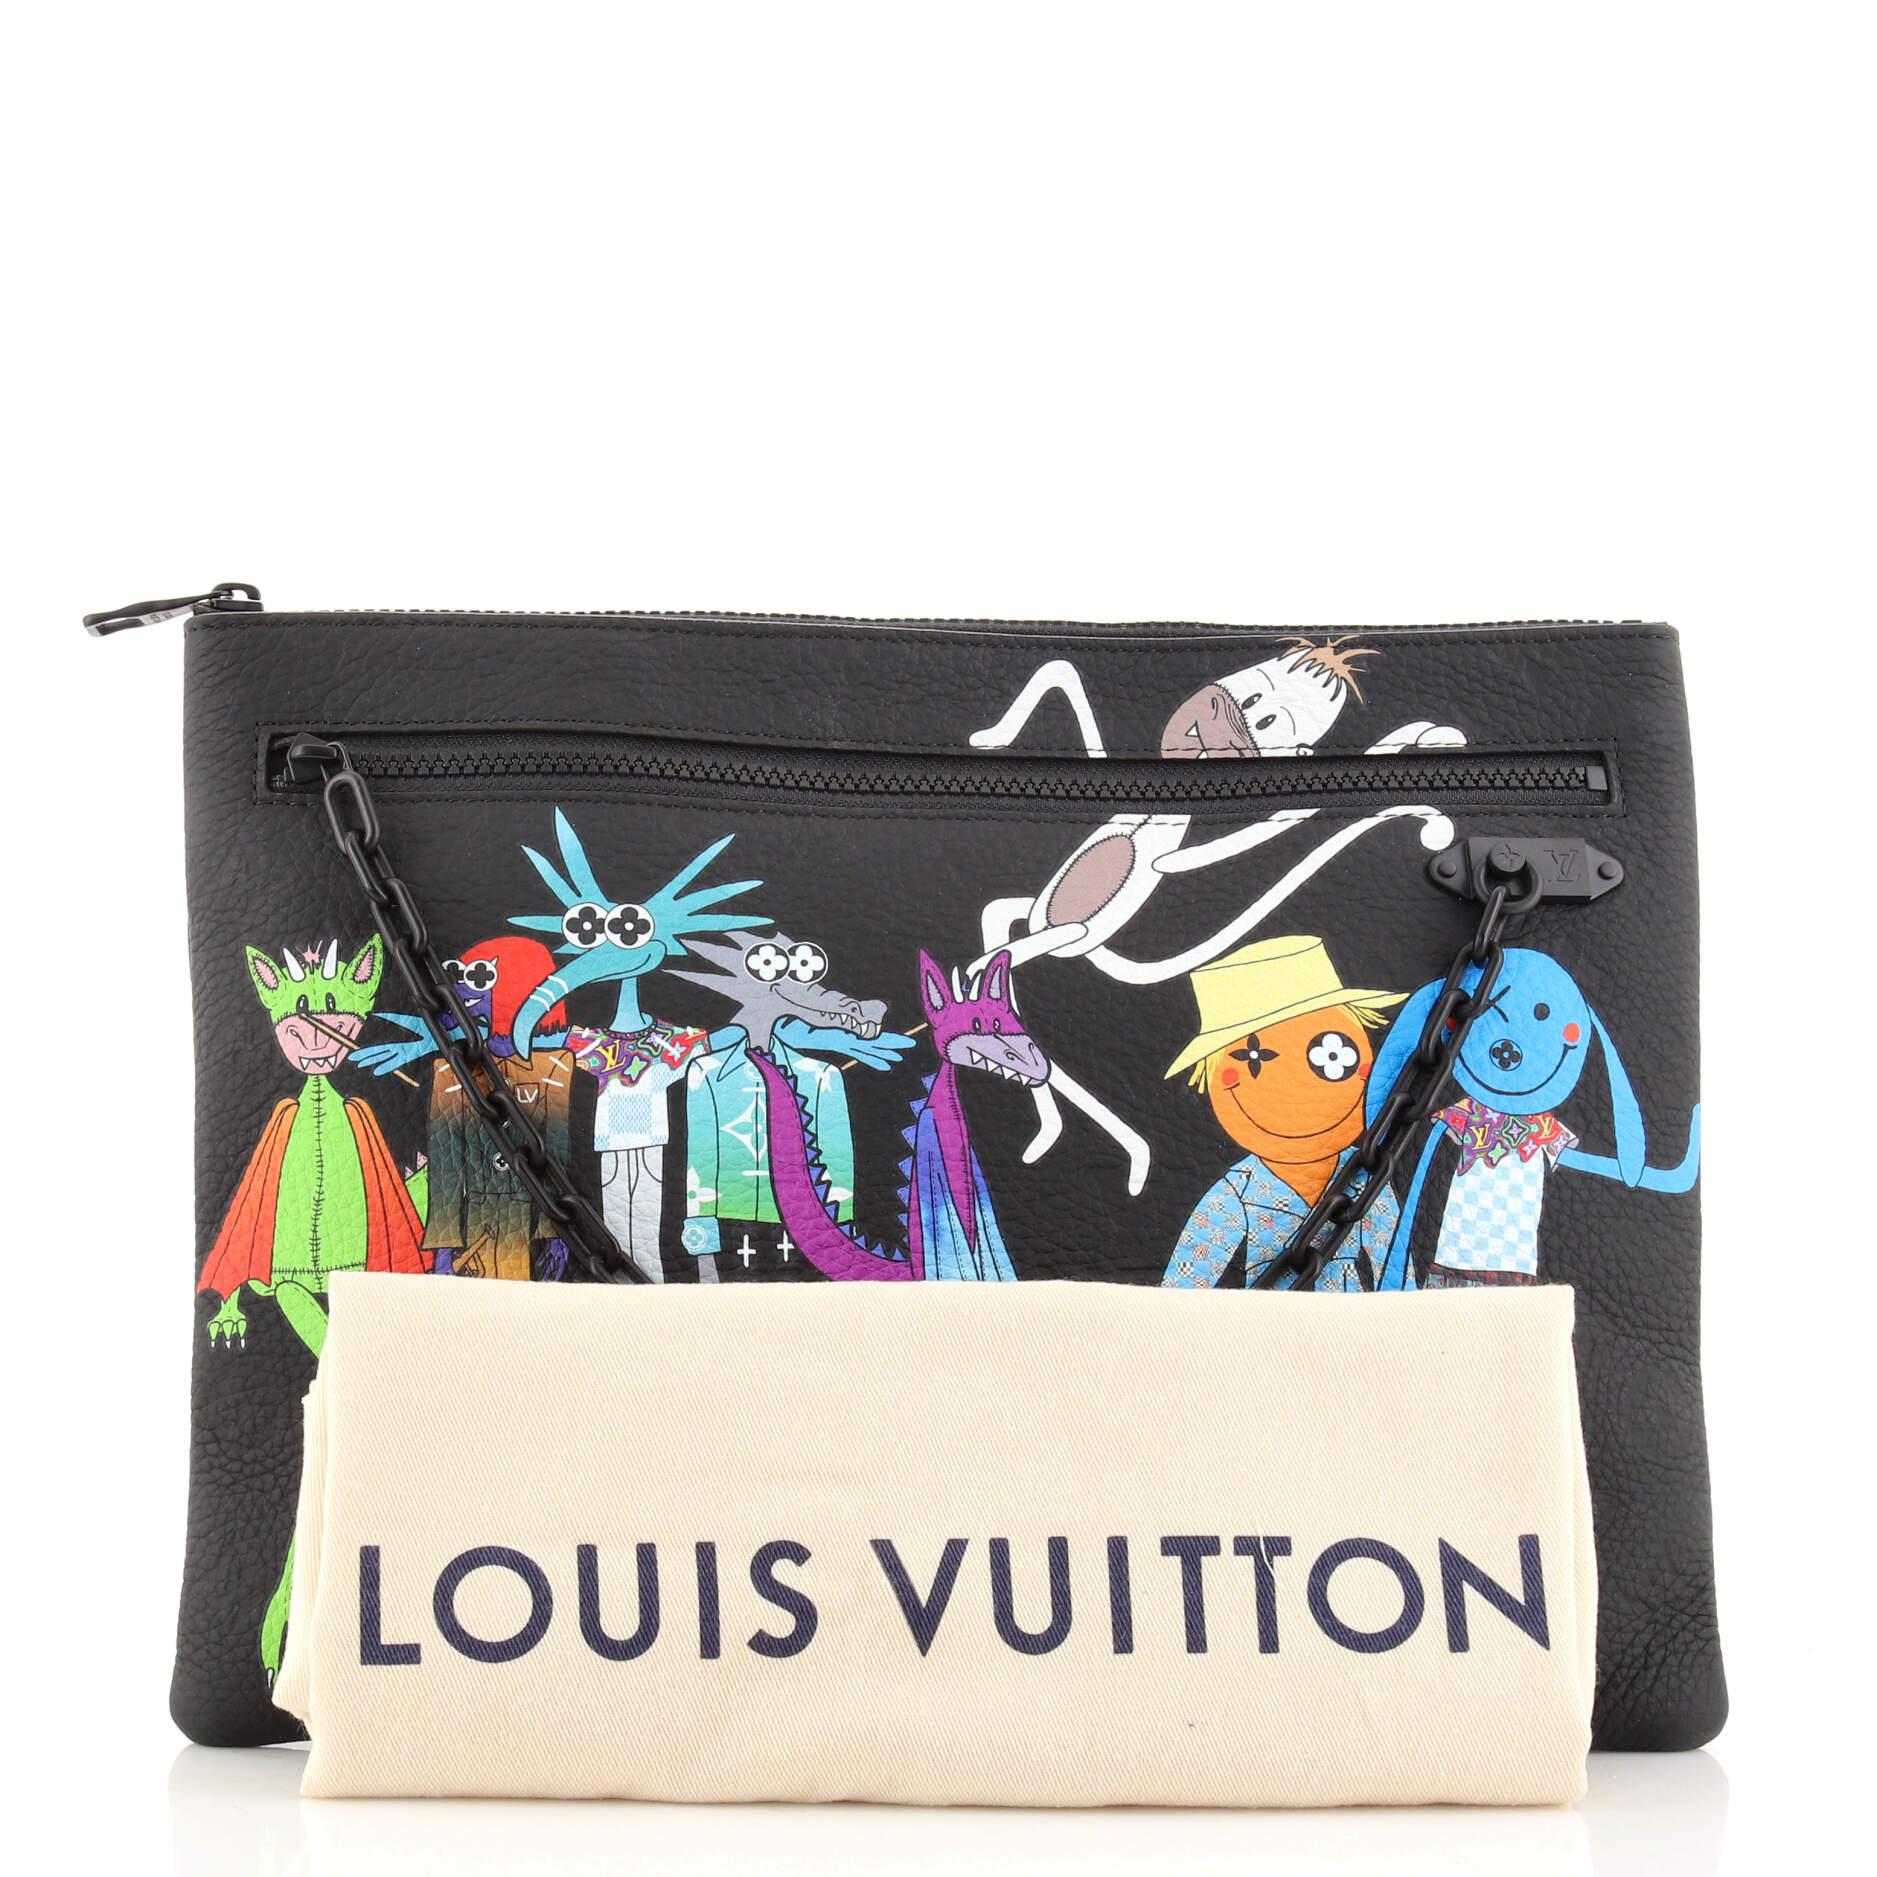 Louis Vuitton Friends Collection - 2 For Sale on 1stDibs